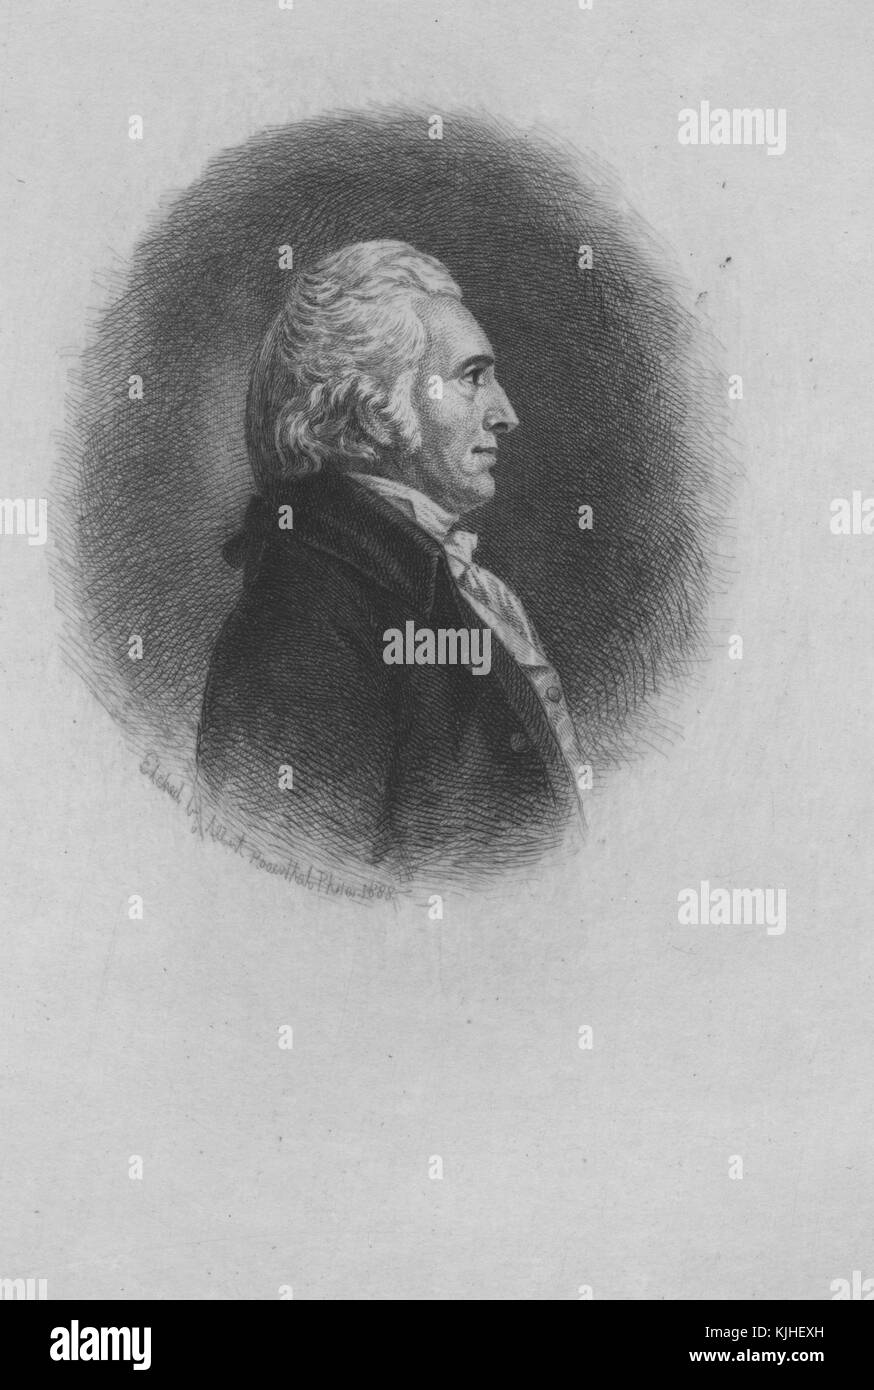 An engraving from a portrait of Gabriel Duvall, he was an Associate Justice of the Supreme Court of the United States between 1811 and 1835, he also served a single term as a member of the United States House of Representatives from Maryland, 1800. From the New York Public Library. Stock Photo